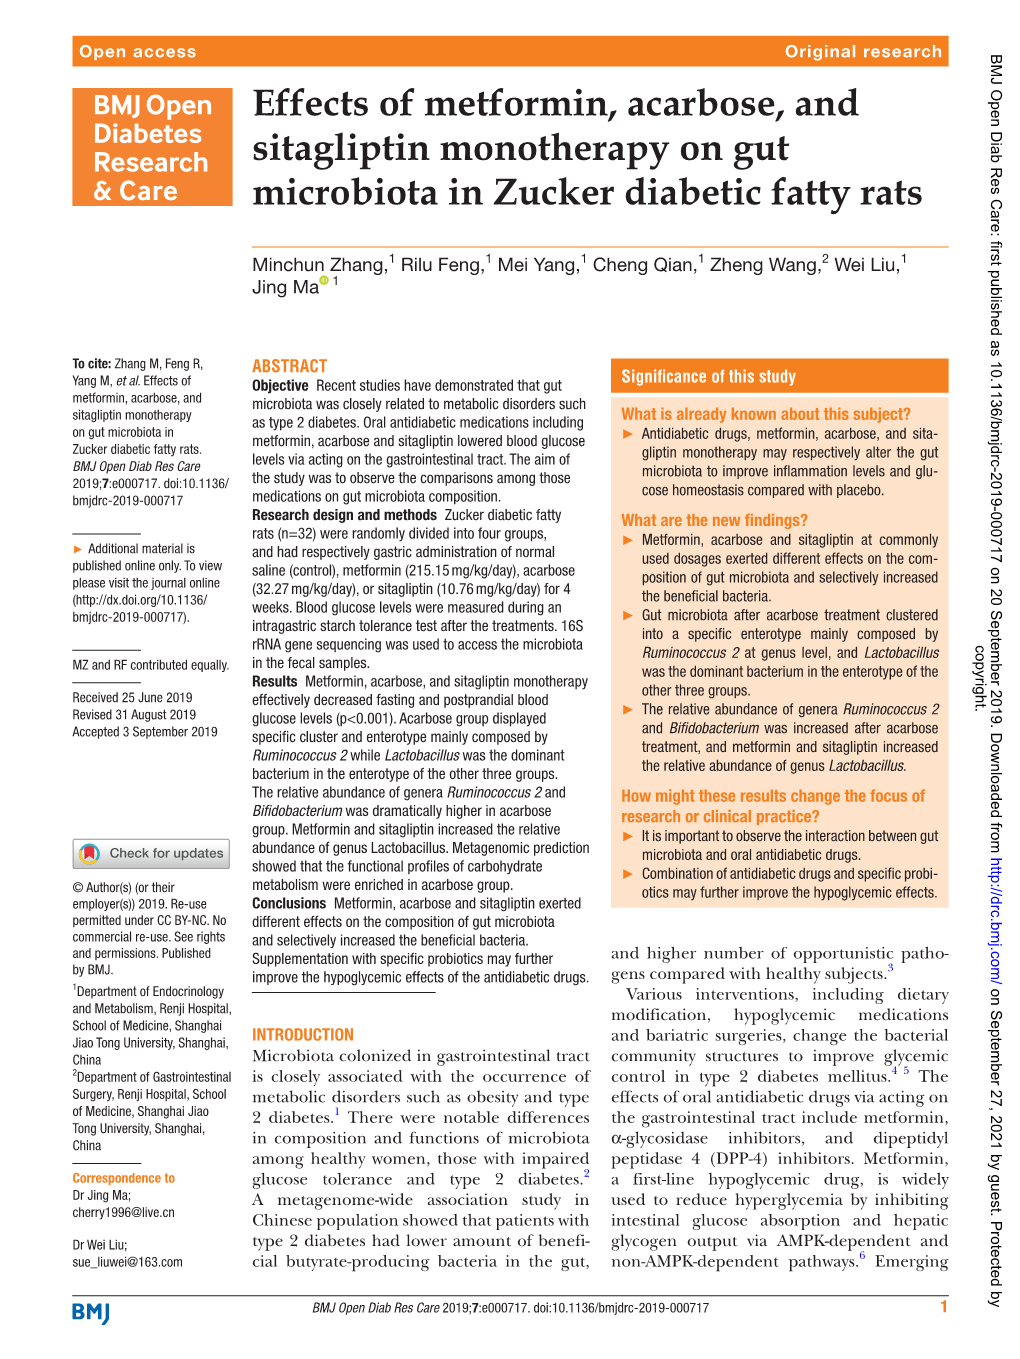 Effects of Metformin, Acarbose, and Sitagliptin Monotherapy on Gut Microbiota in Zucker Diabetic Fatty Rats